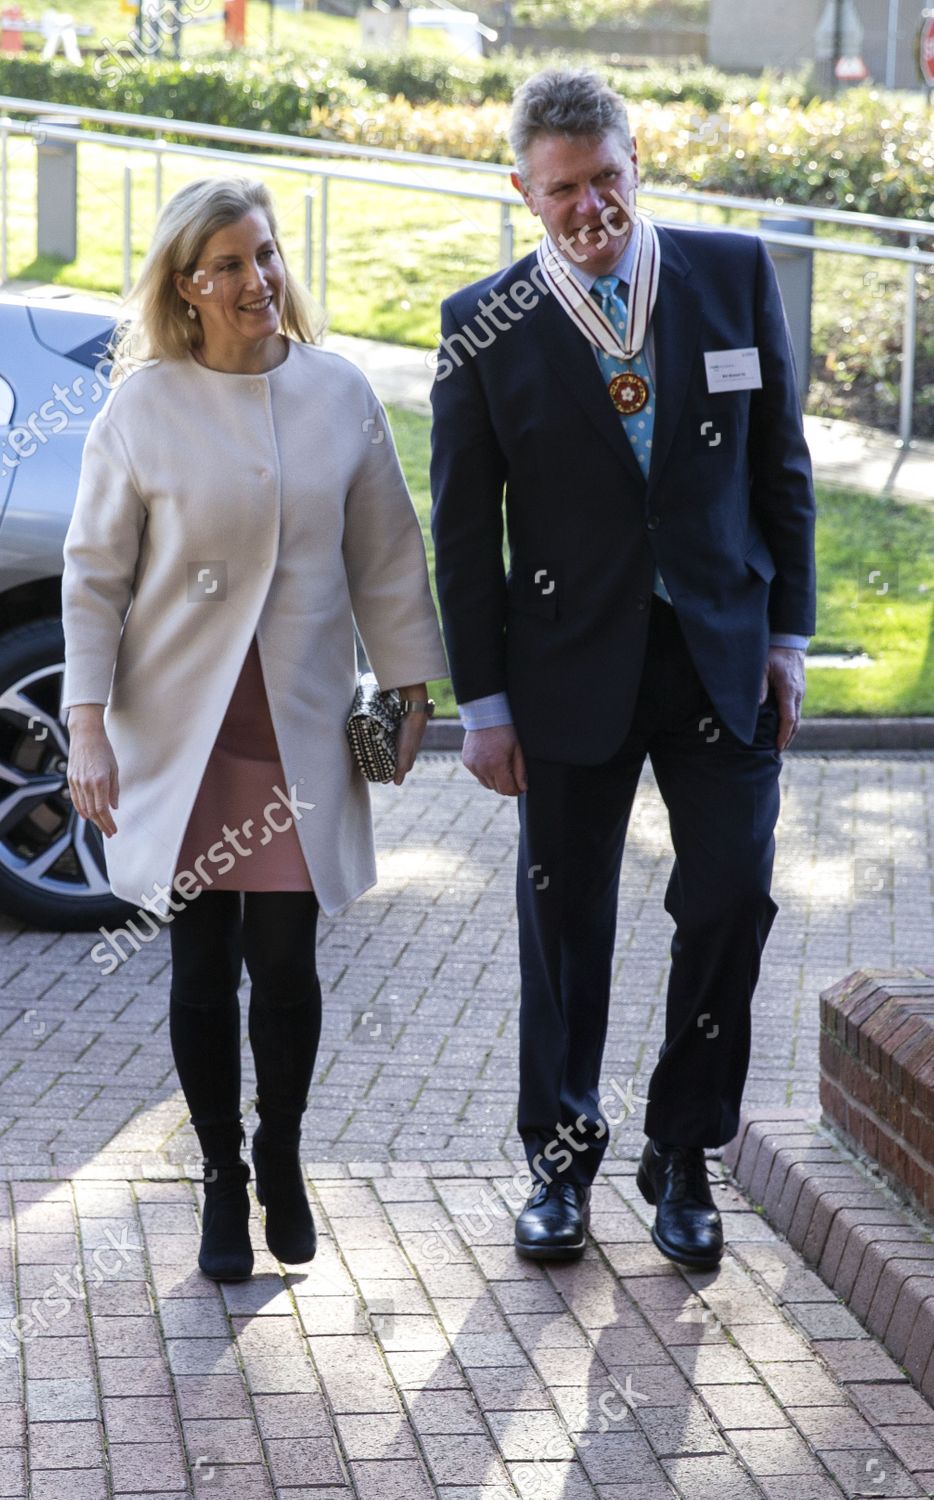 CASA REAL BRITÁNICA - Página 14 Sophie-countess-of-wessex-opens-new-health-sciences-institute-university-of-surrey-guildford-uk-shutterstock-editorial-10542421a